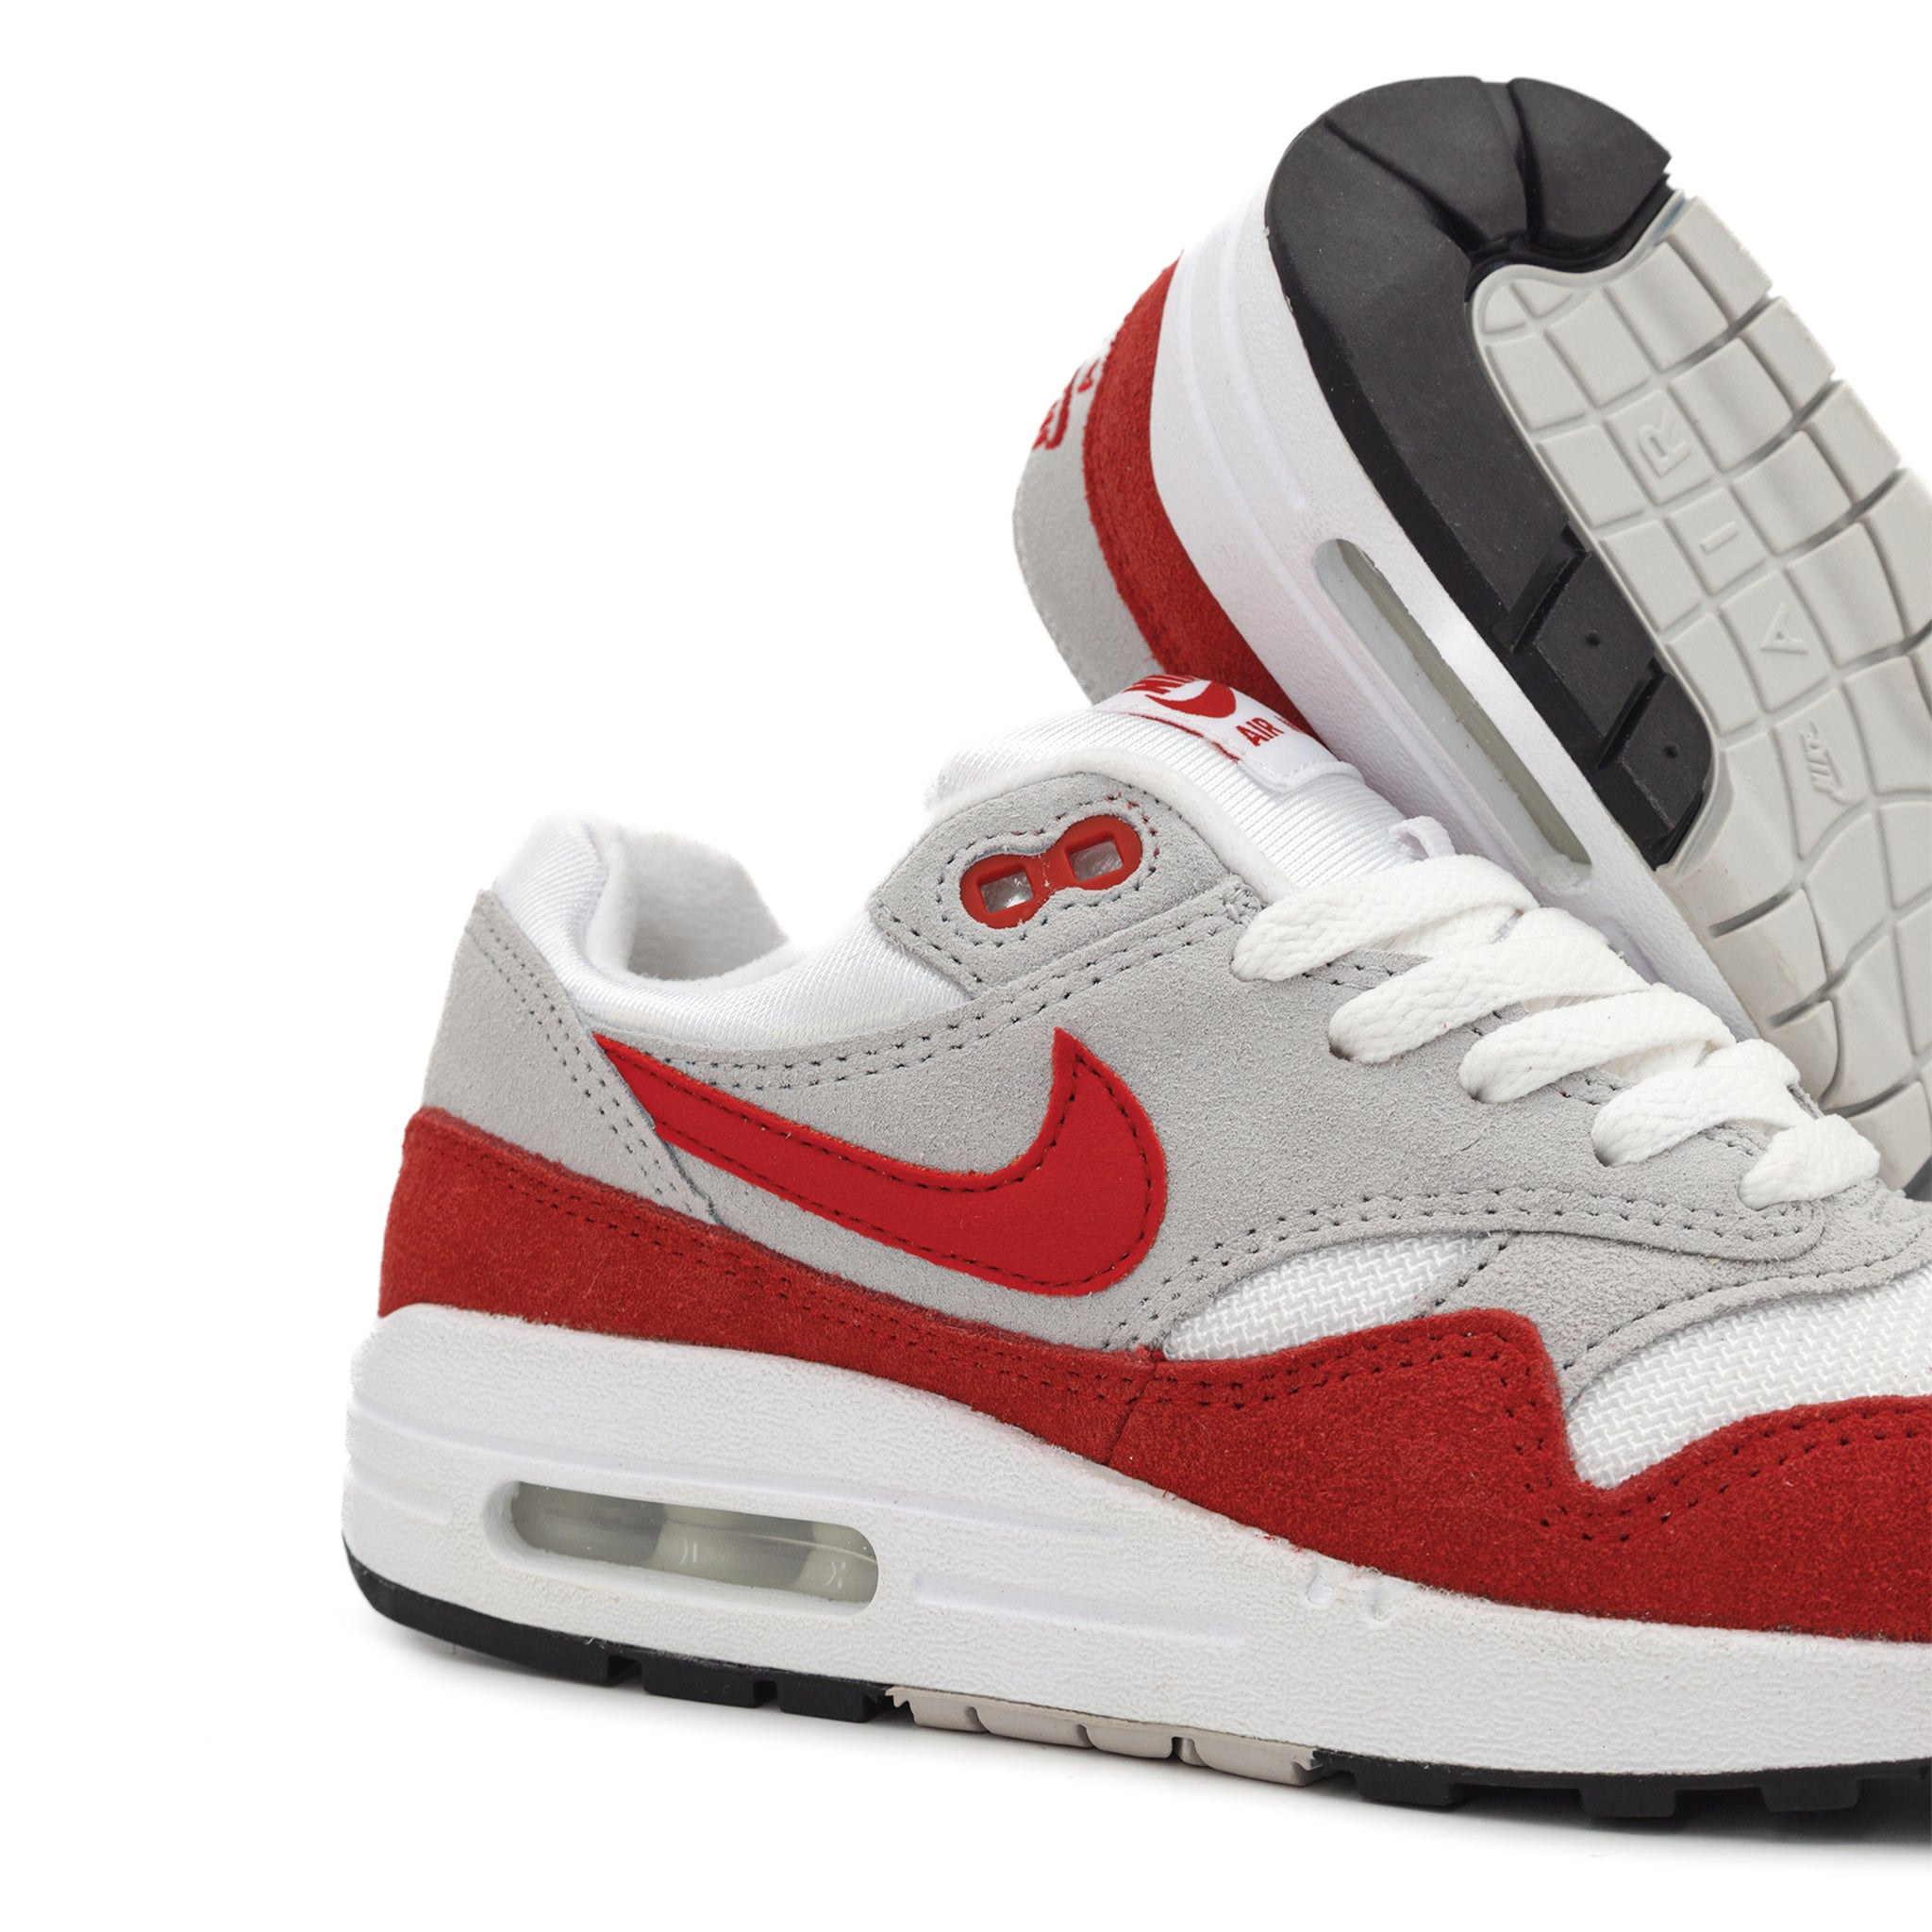 Bóveda Turismo escribir Nike Air Max 1 OG GS "Challenge Red" 555766-146 – Laced